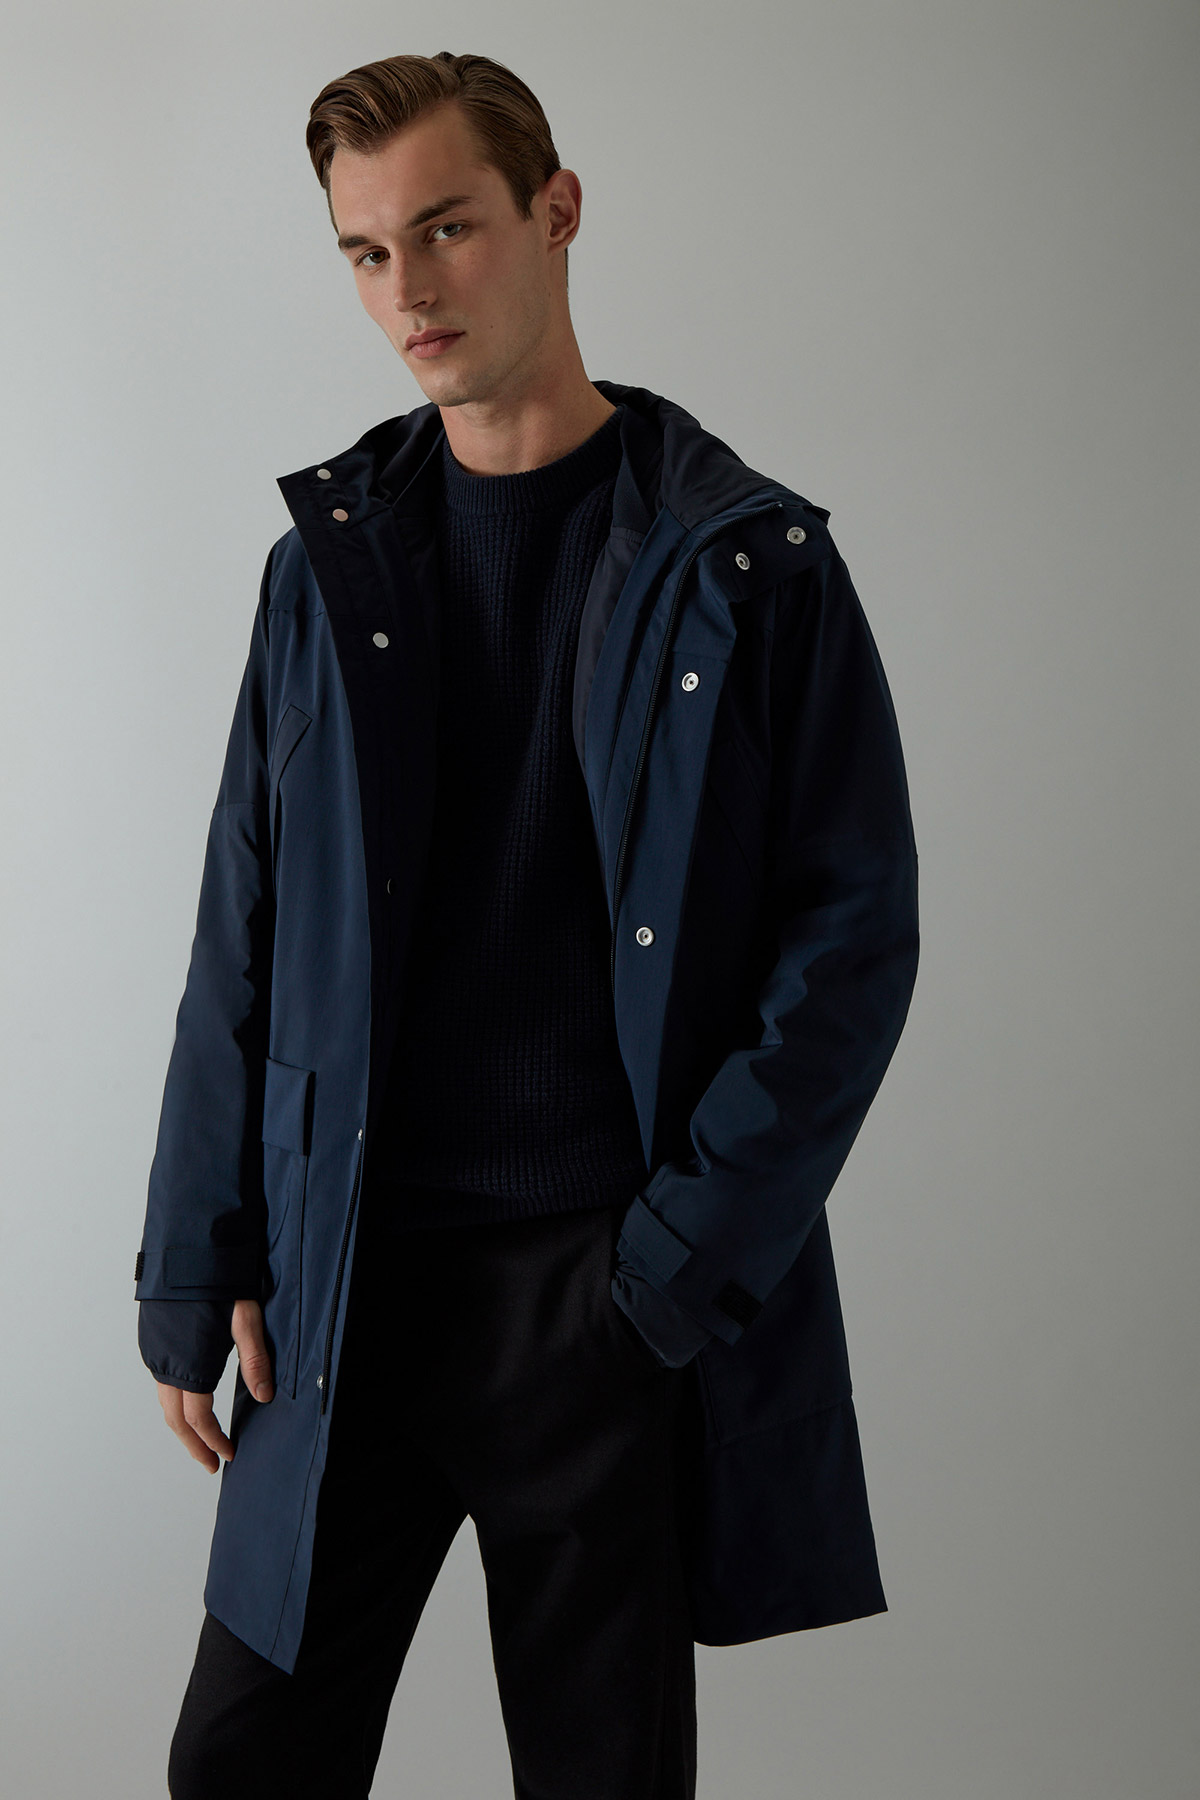 THE WATERPROOF RAINCOAT  ​​ Recycled fabrics. Watertight seams. Minimal design. A modern take on traditional outerwear, this essential will keep you dry come rain, shine or snow.  ​​